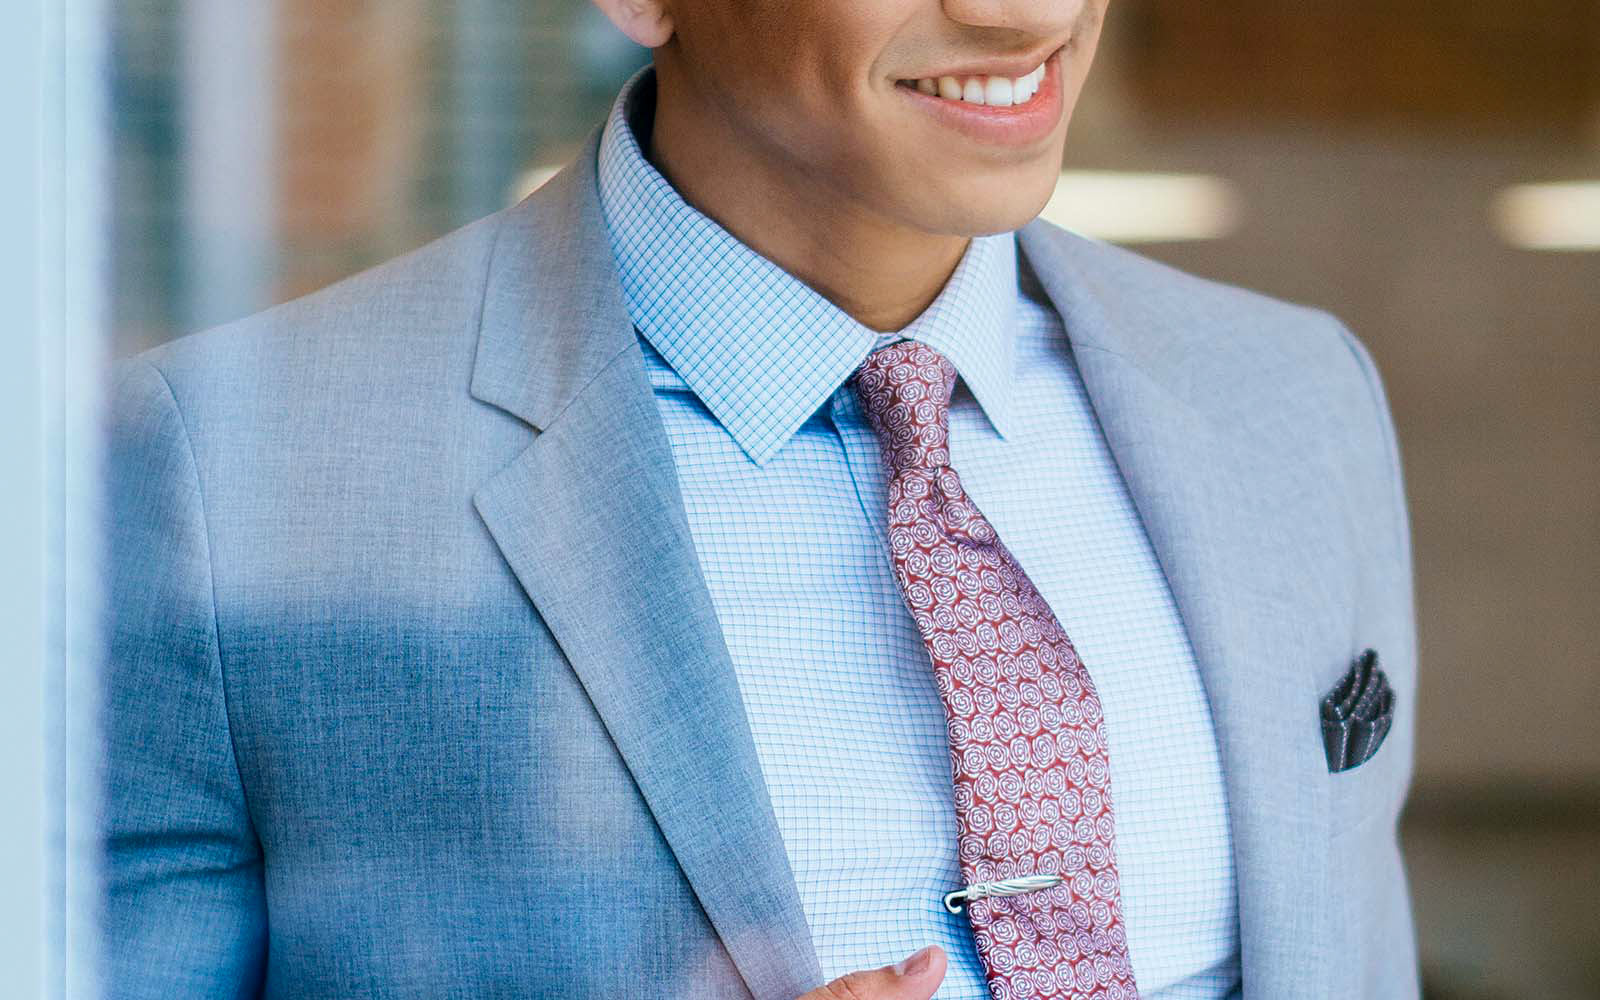 perfect way to match and wear shirt and tie